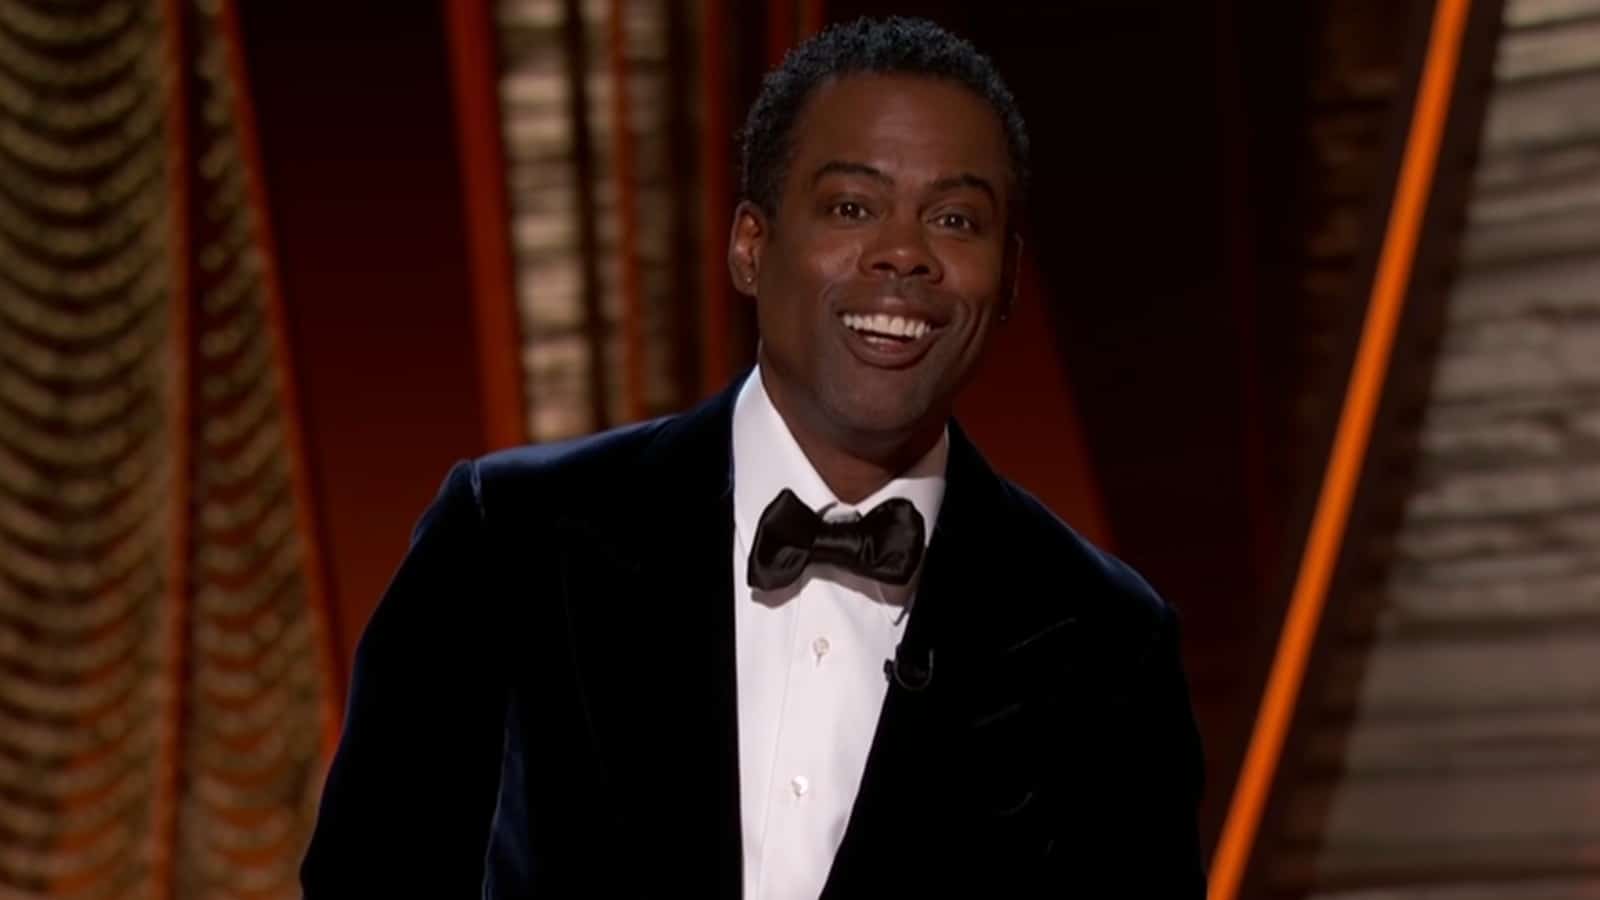 Chris Rock after Will Smith slapped him at the Oscars